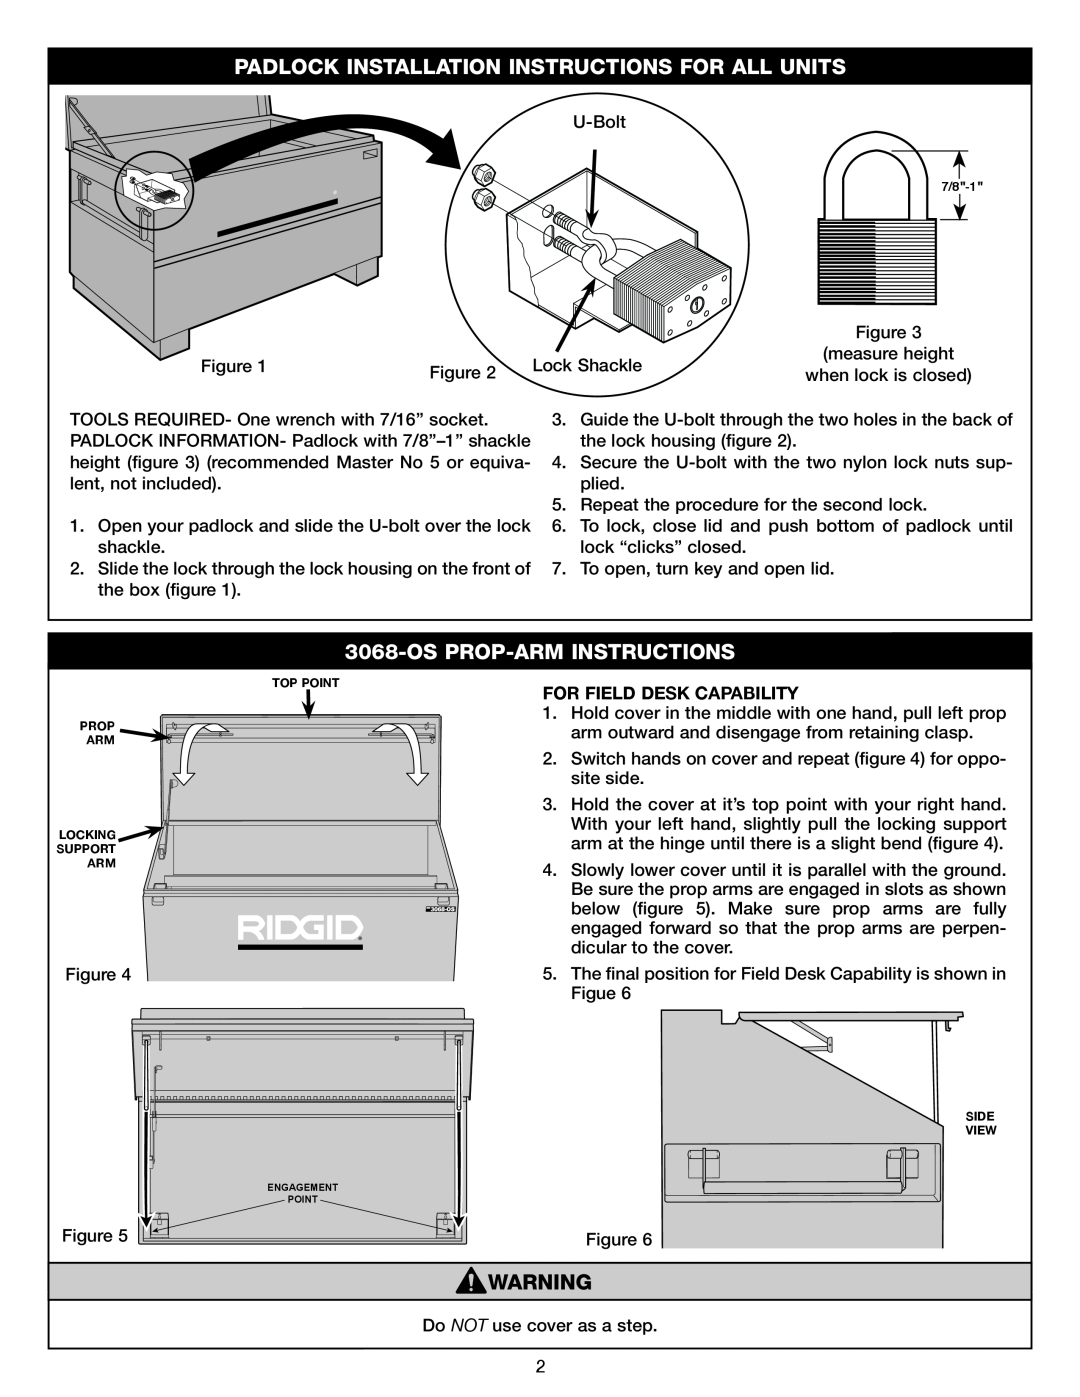 RIDGID 3068-OS Padlock Installation Instructions For All Units, Os Prop-Arm Instructions, For Field Desk Capability 